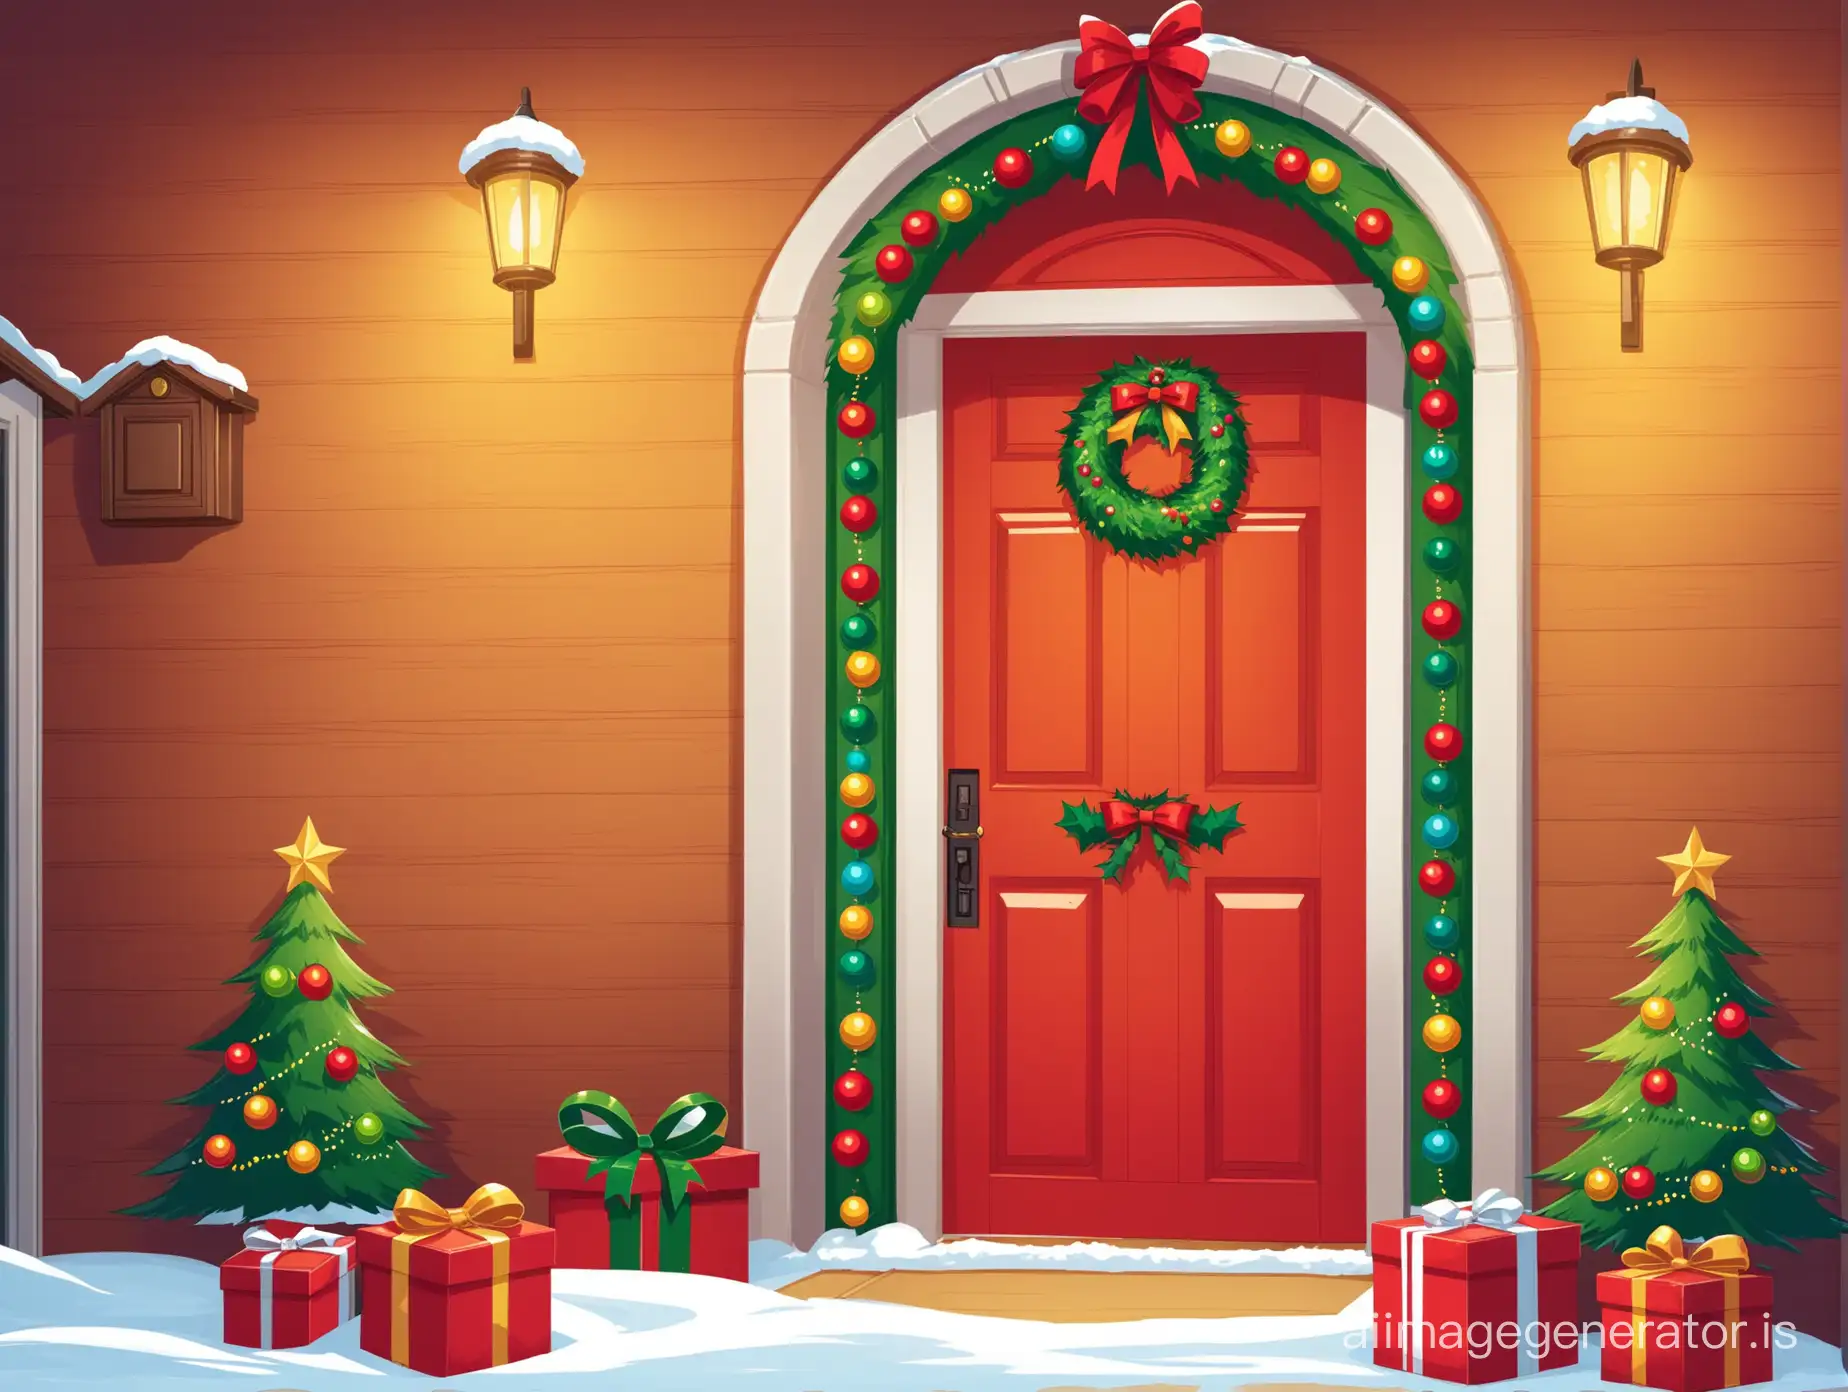 create the closed front door of Mr. Santa Cluases home